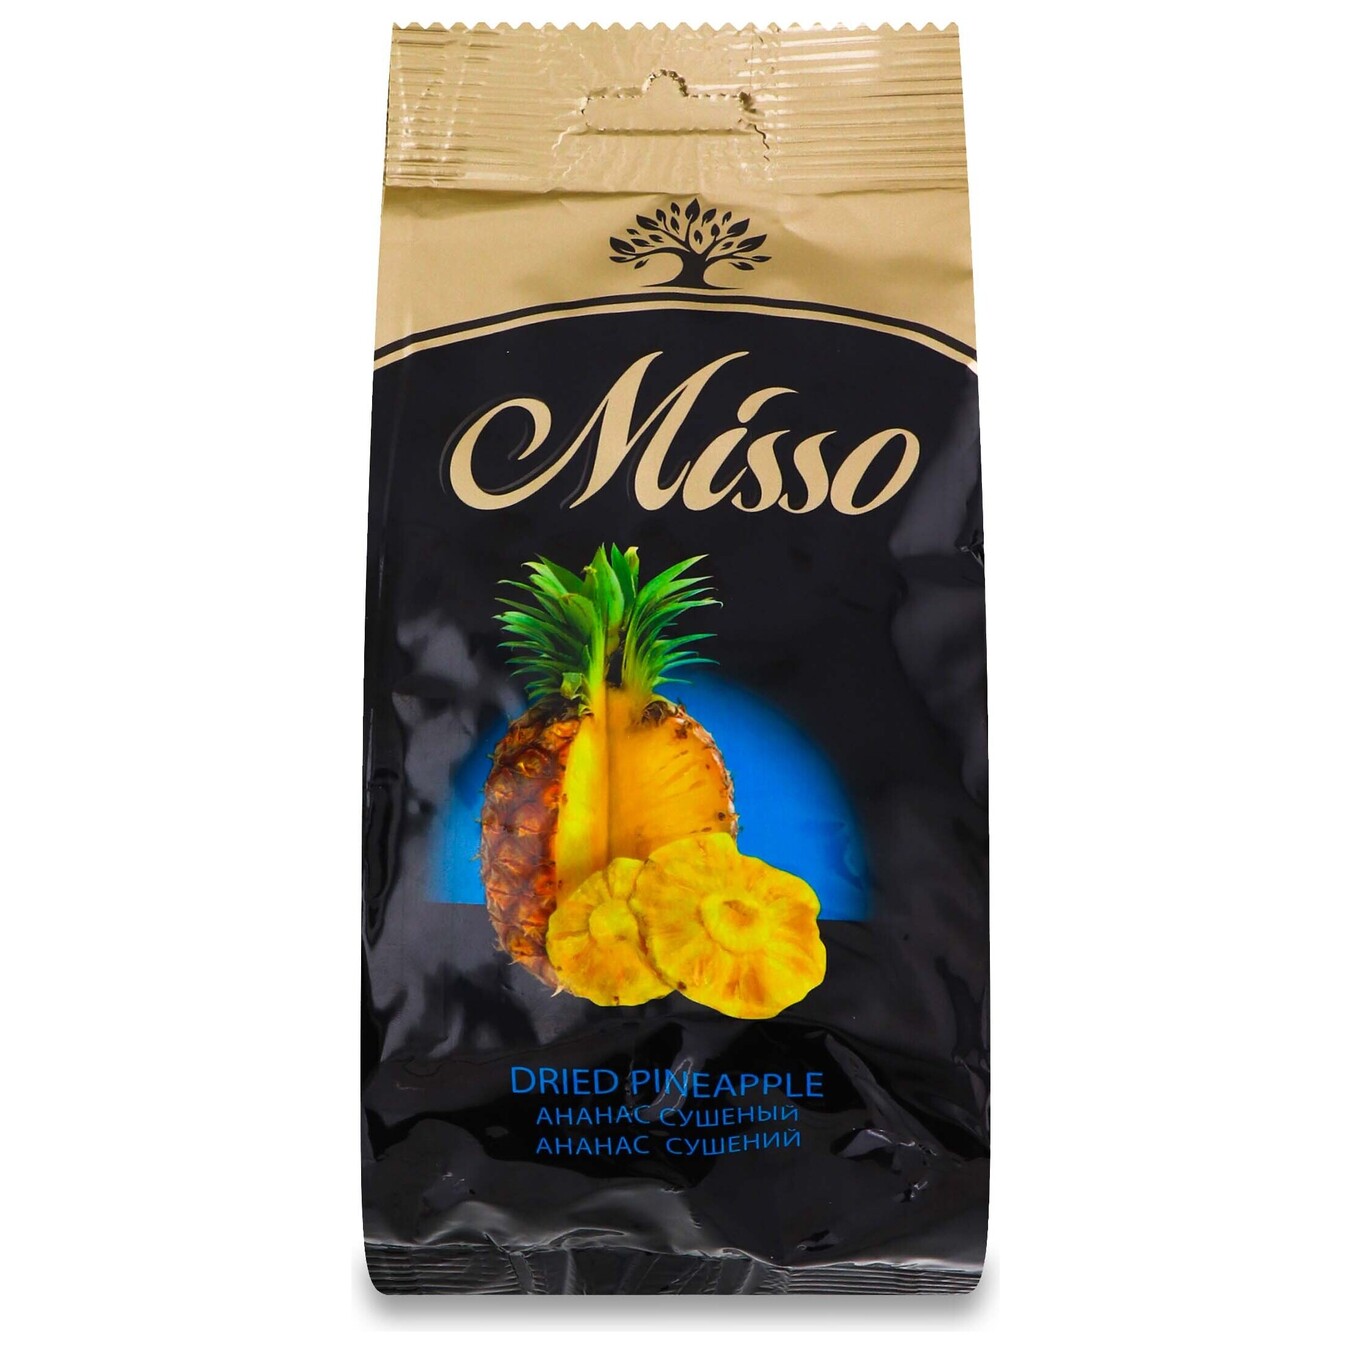 Pineapple Misso dried 100g